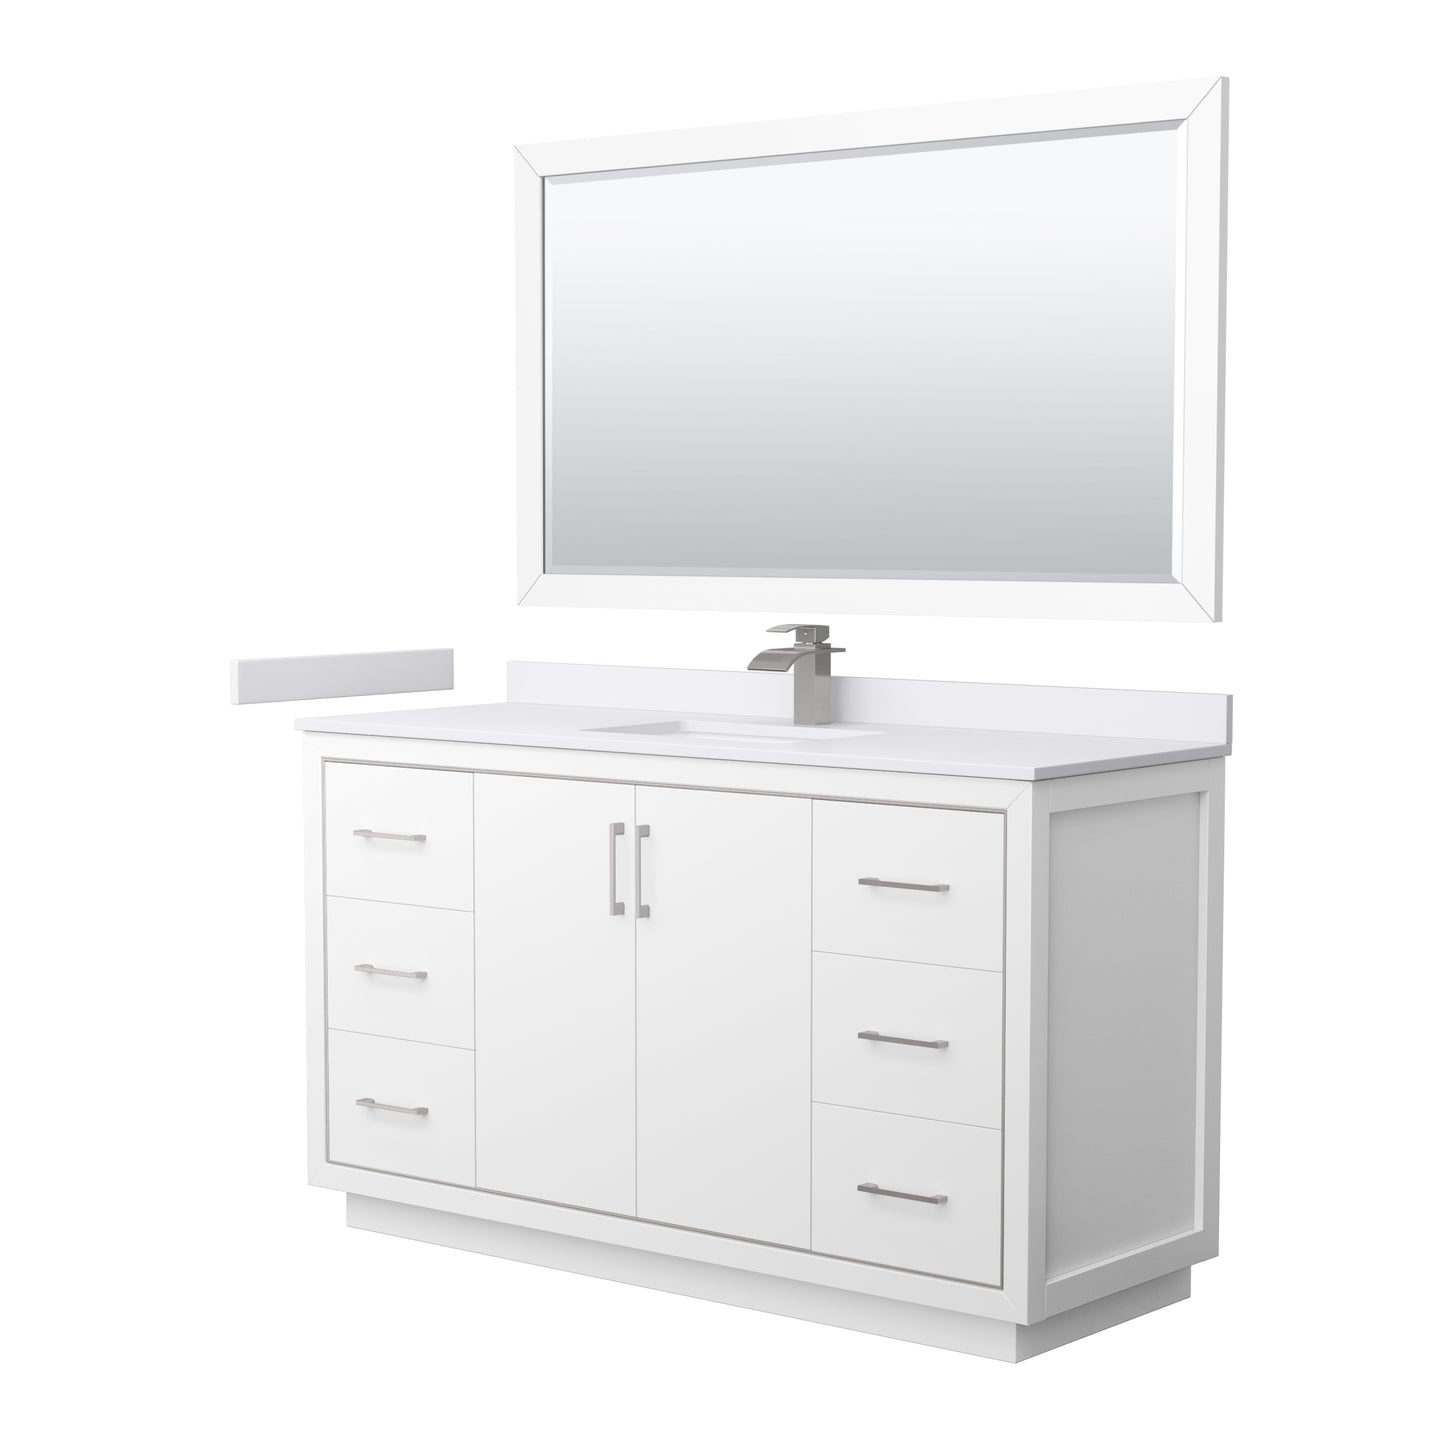 Wyndham Icon 60 Inch Single Bathroom Vanity White Cultured Marble Countertop with Undermount Square Sink, Brushed Nickel Trim and 58 Inch Mirror - Luxe Bathroom Vanities